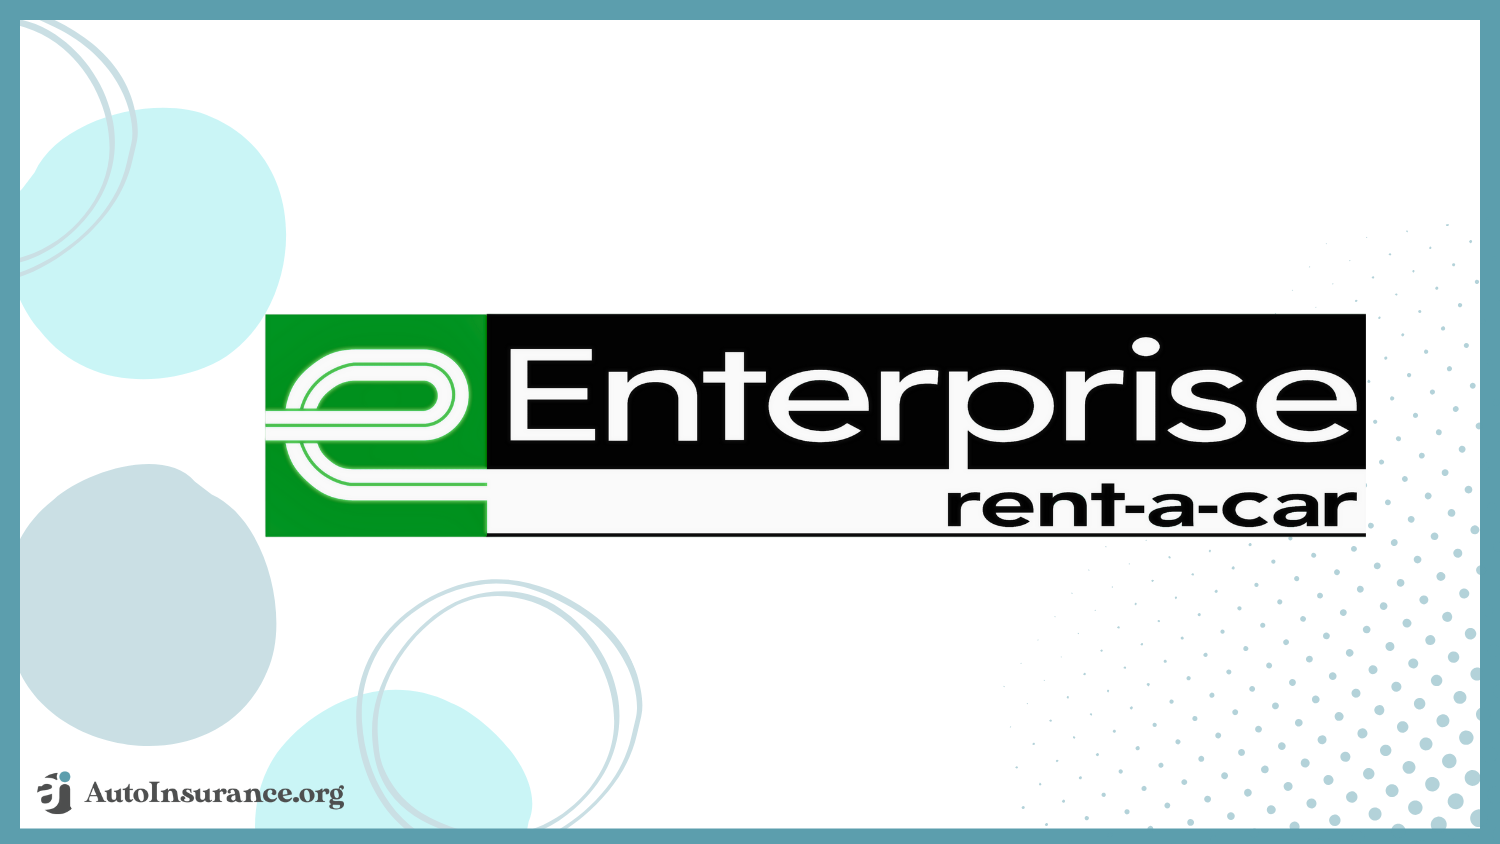 Enterprise: Best Rental Auto Insurance That Covers Additional Drivers